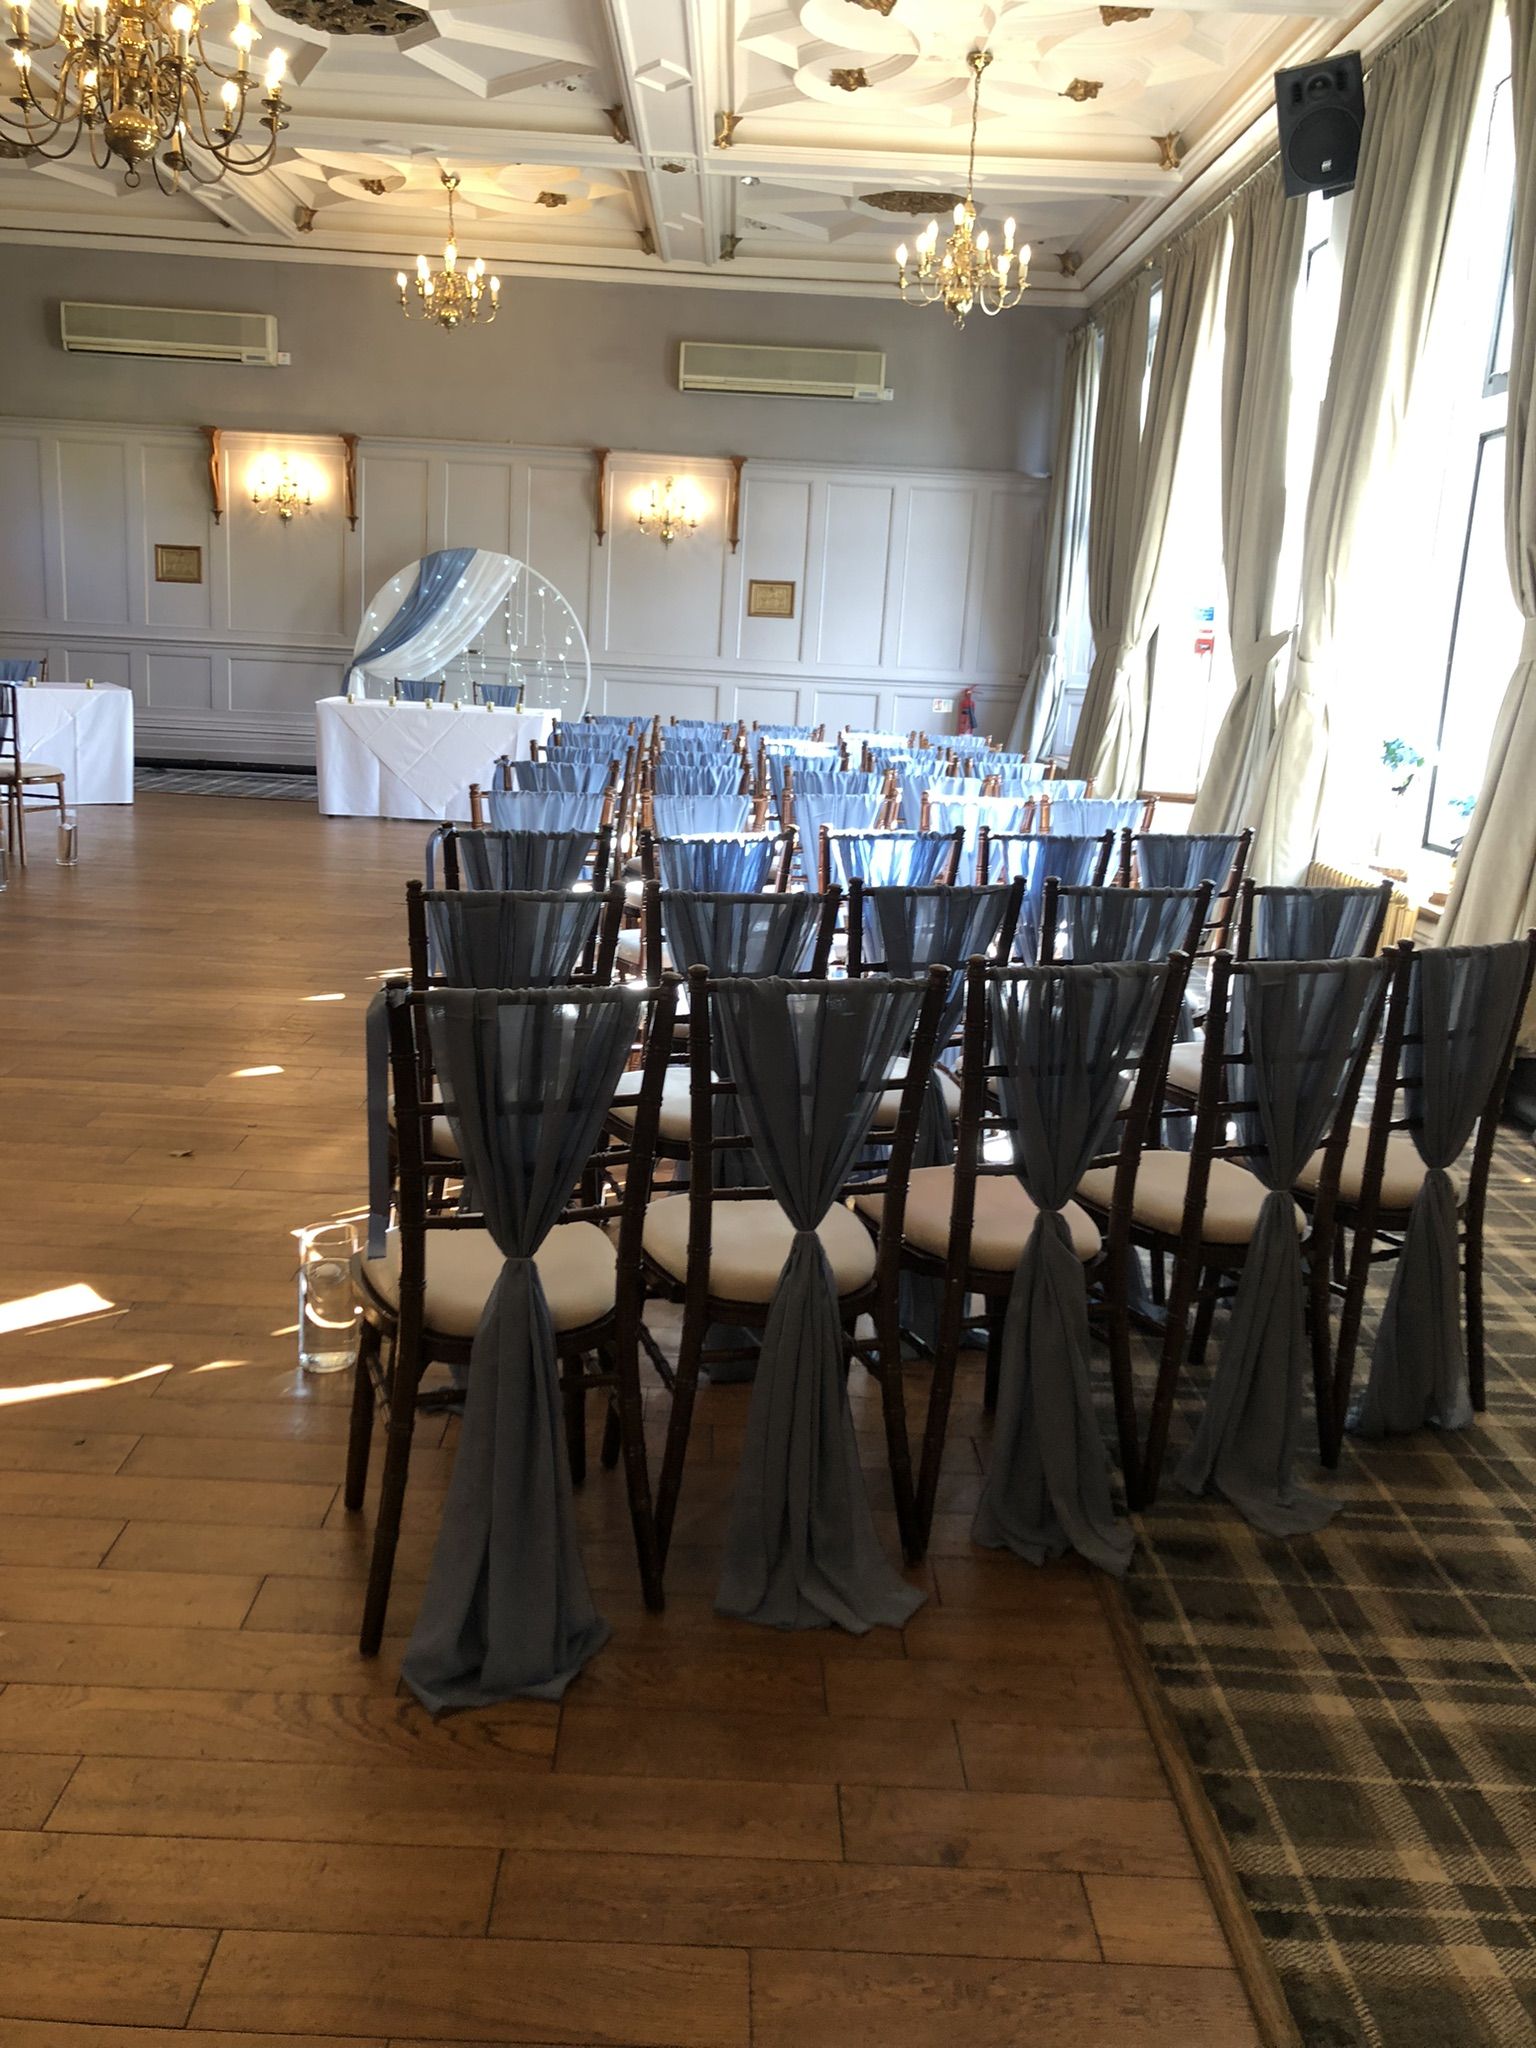 a large room with rows of chairs and a chandelier.